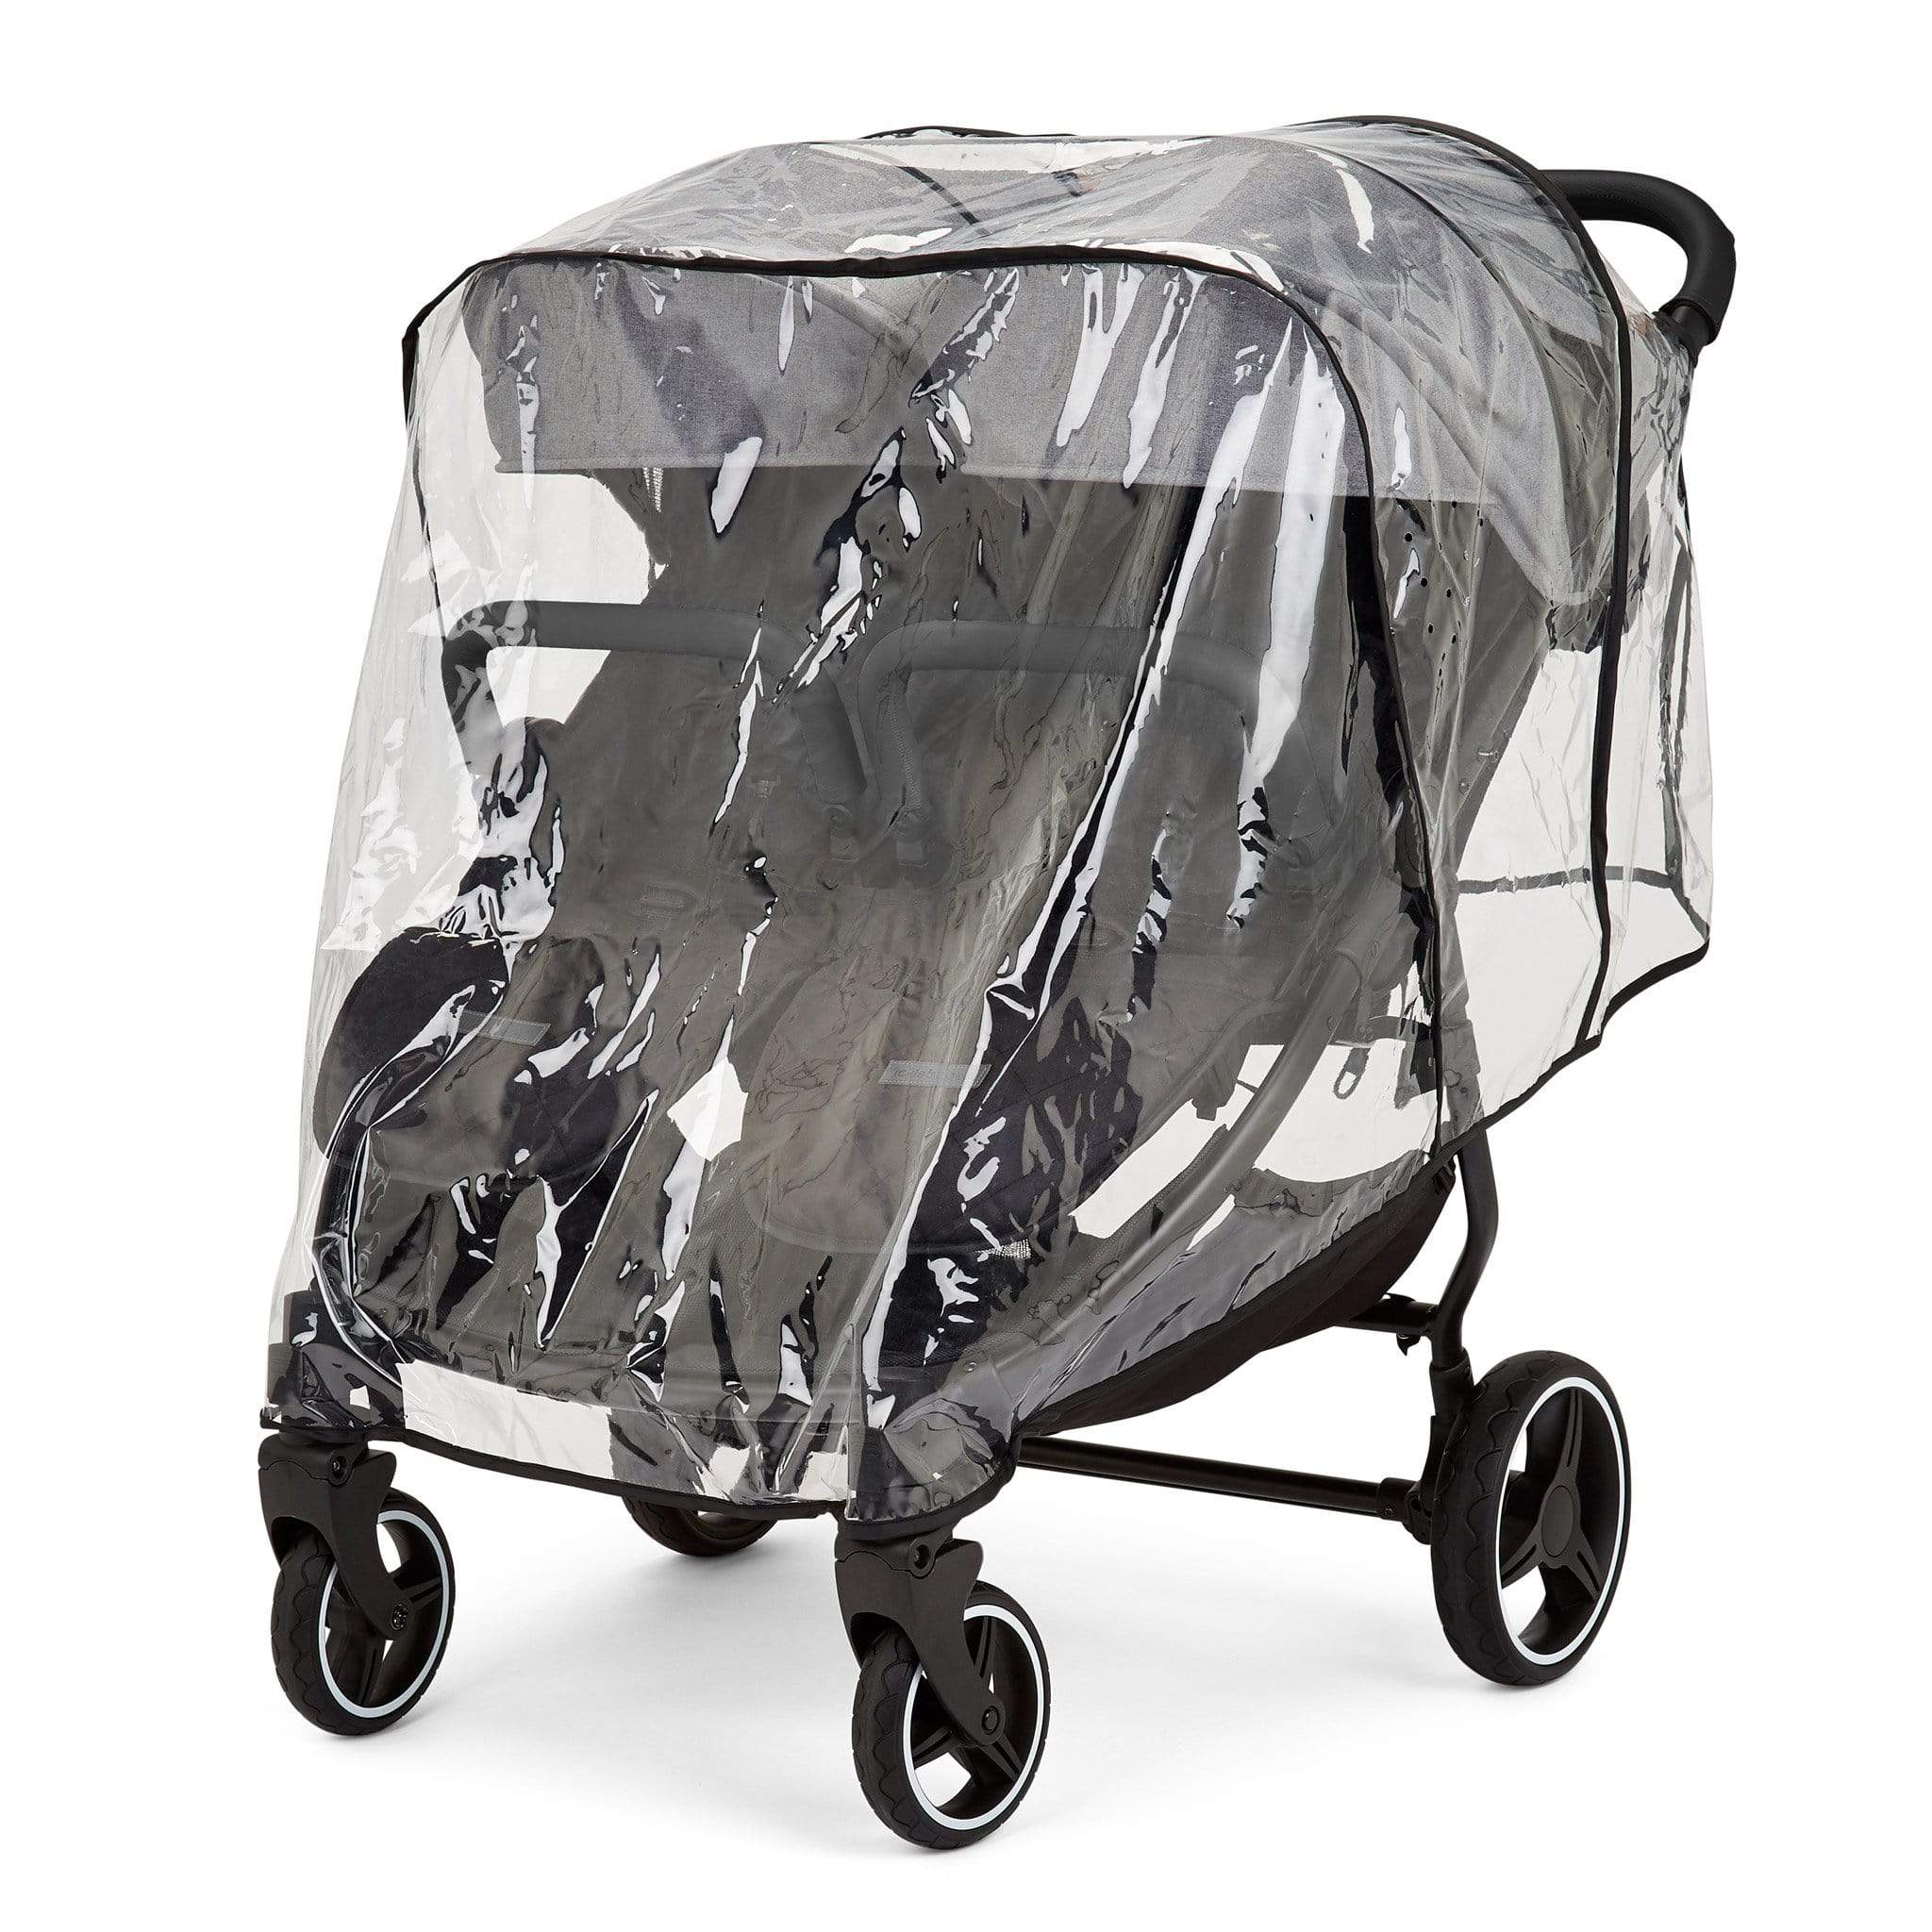 Ickle Bubba double buggies Ickle Bubba Venus Double Stroller Black/Space Grey/Black 16-004-100-014